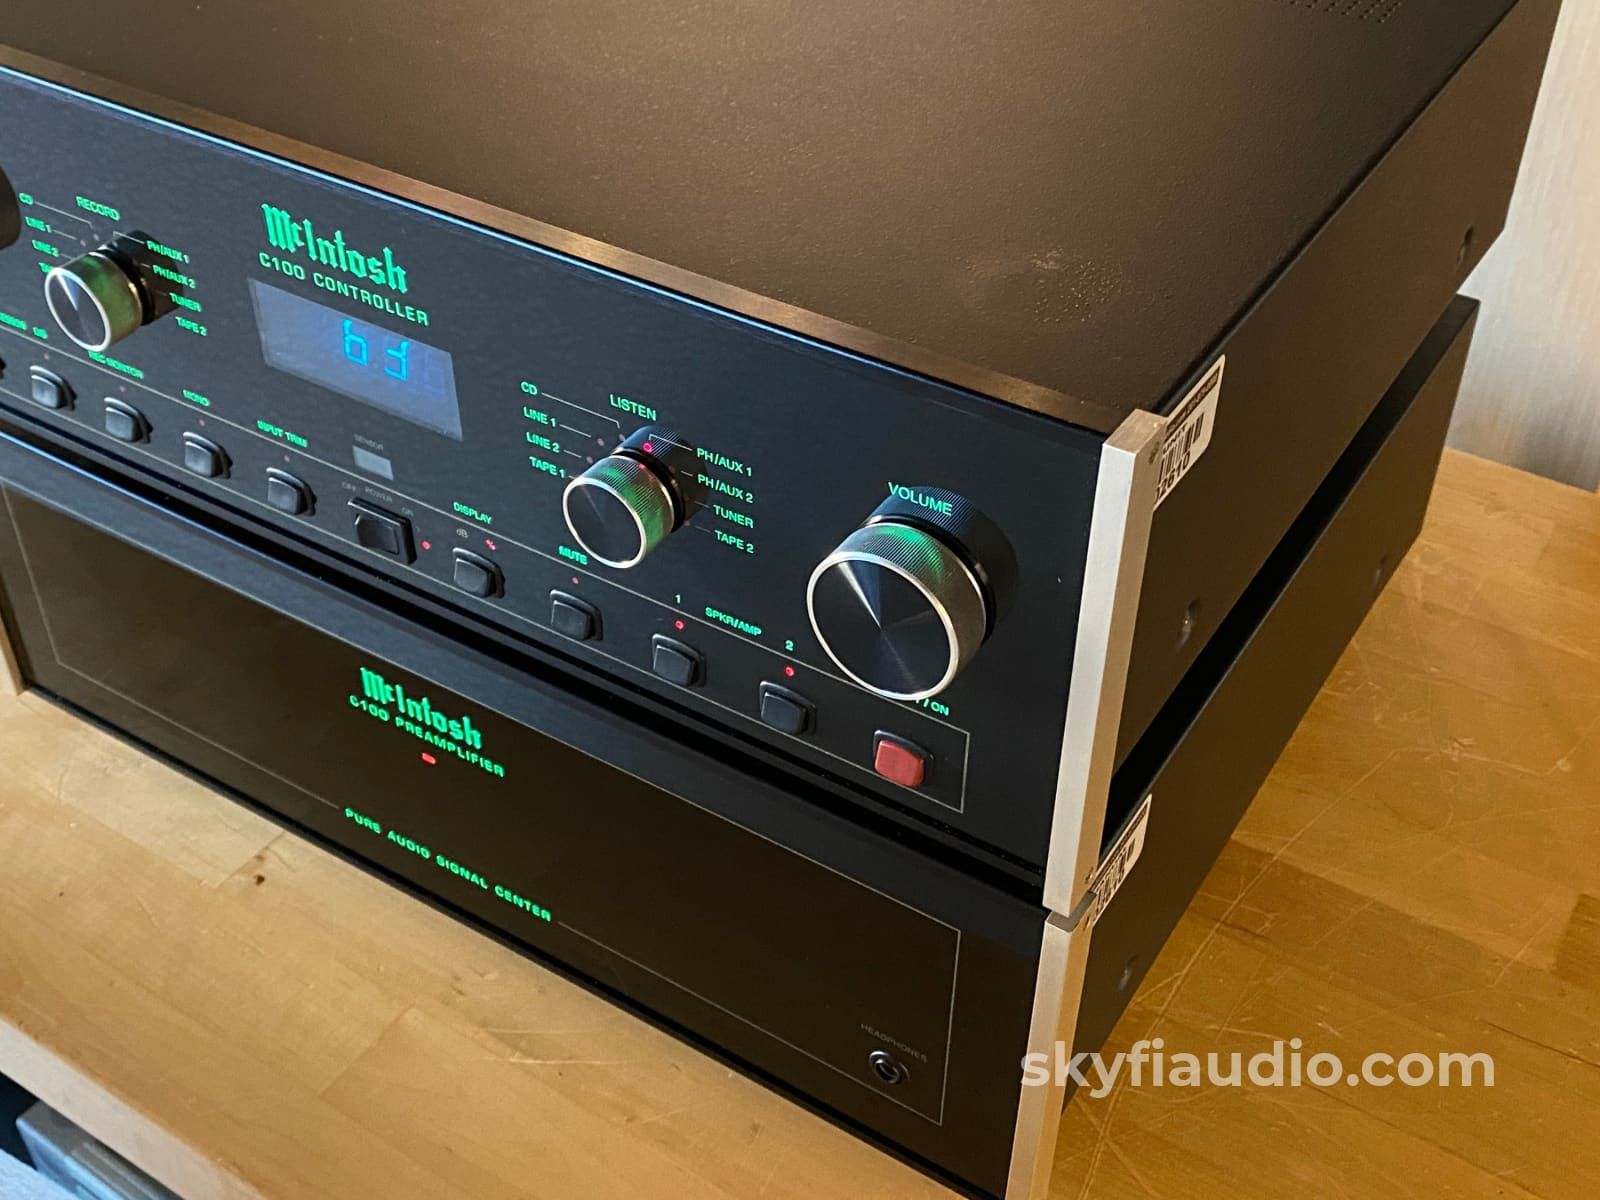 Mcintosh C100 Two Chassis Analog Preamp With Superb Phono Section Preamplifier